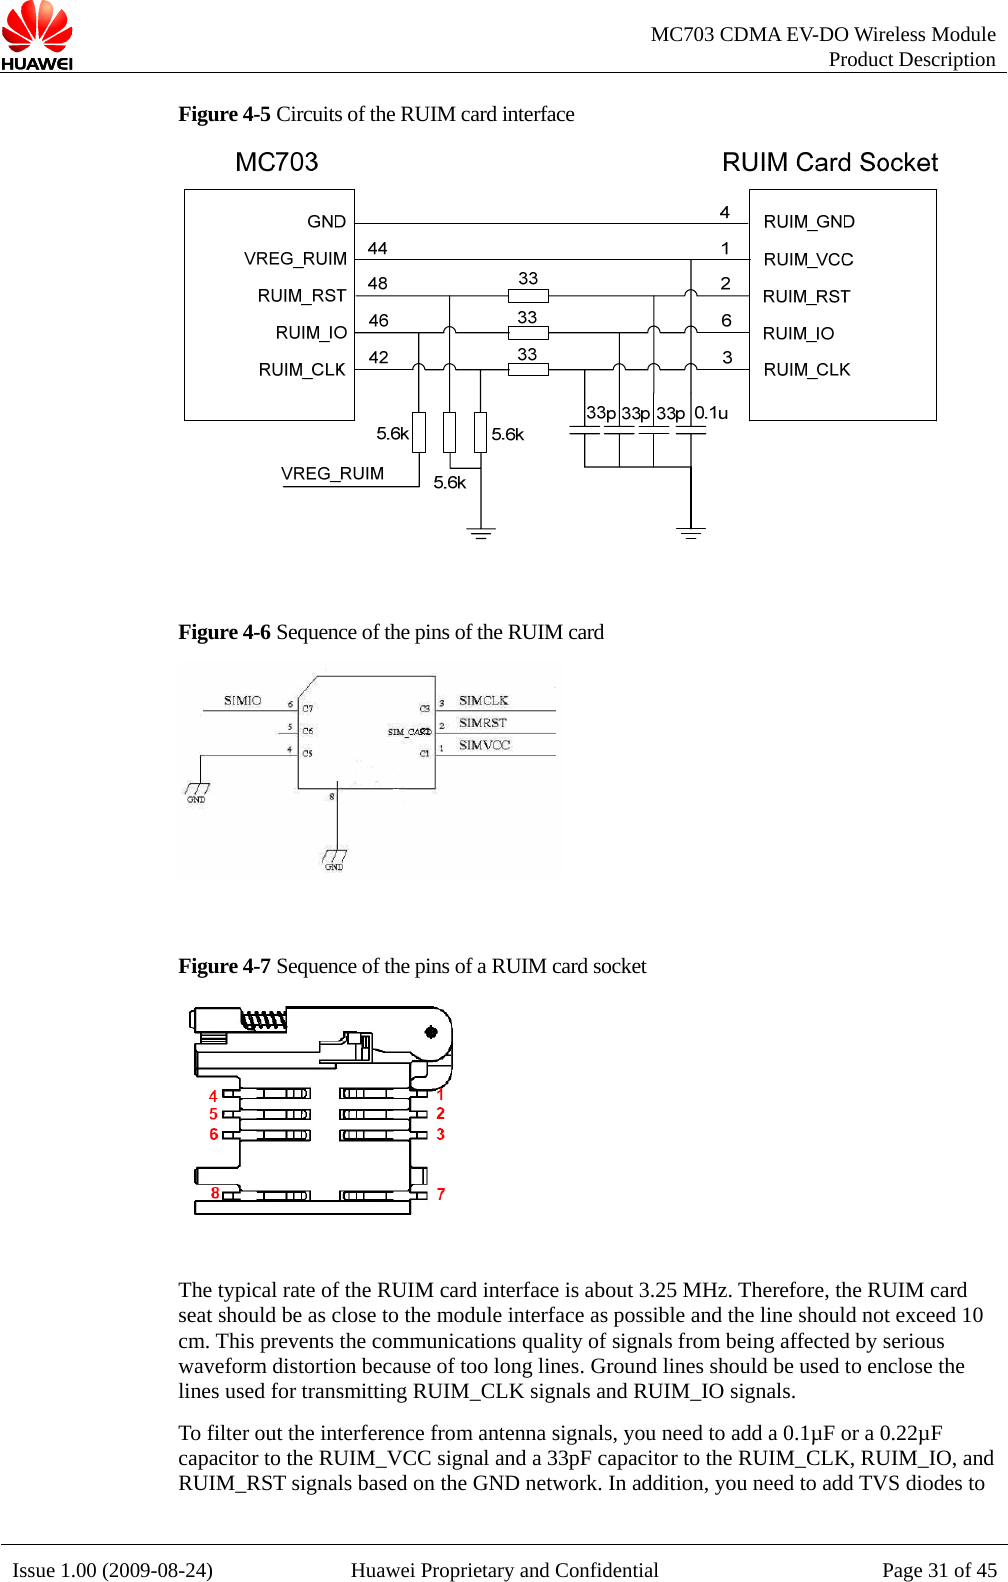   MC703 CDMA EV-DO Wireless Module Product Description Issue 1.00 (2009-08-24)  Huawei Proprietary and Confidential Page 31 of 45Figure 4-5 Circuits of the RUIM card interface   Figure 4-6 Sequence of the pins of the RUIM card     Figure 4-7 Sequence of the pins of a RUIM card socket   The typical rate of the RUIM card interface is about 3.25 MHz. Therefore, the RUIM card seat should be as close to the module interface as possible and the line should not exceed 10 cm. This prevents the communications quality of signals from being affected by serious waveform distortion because of too long lines. Ground lines should be used to enclose the lines used for transmitting RUIM_CLK signals and RUIM_IO signals. To filter out the interference from antenna signals, you need to add a 0.1µF or a 0.22µF capacitor to the RUIM_VCC signal and a 33pF capacitor to the RUIM_CLK, RUIM_IO, and RUIM_RST signals based on the GND network. In addition, you need to add TVS diodes to  